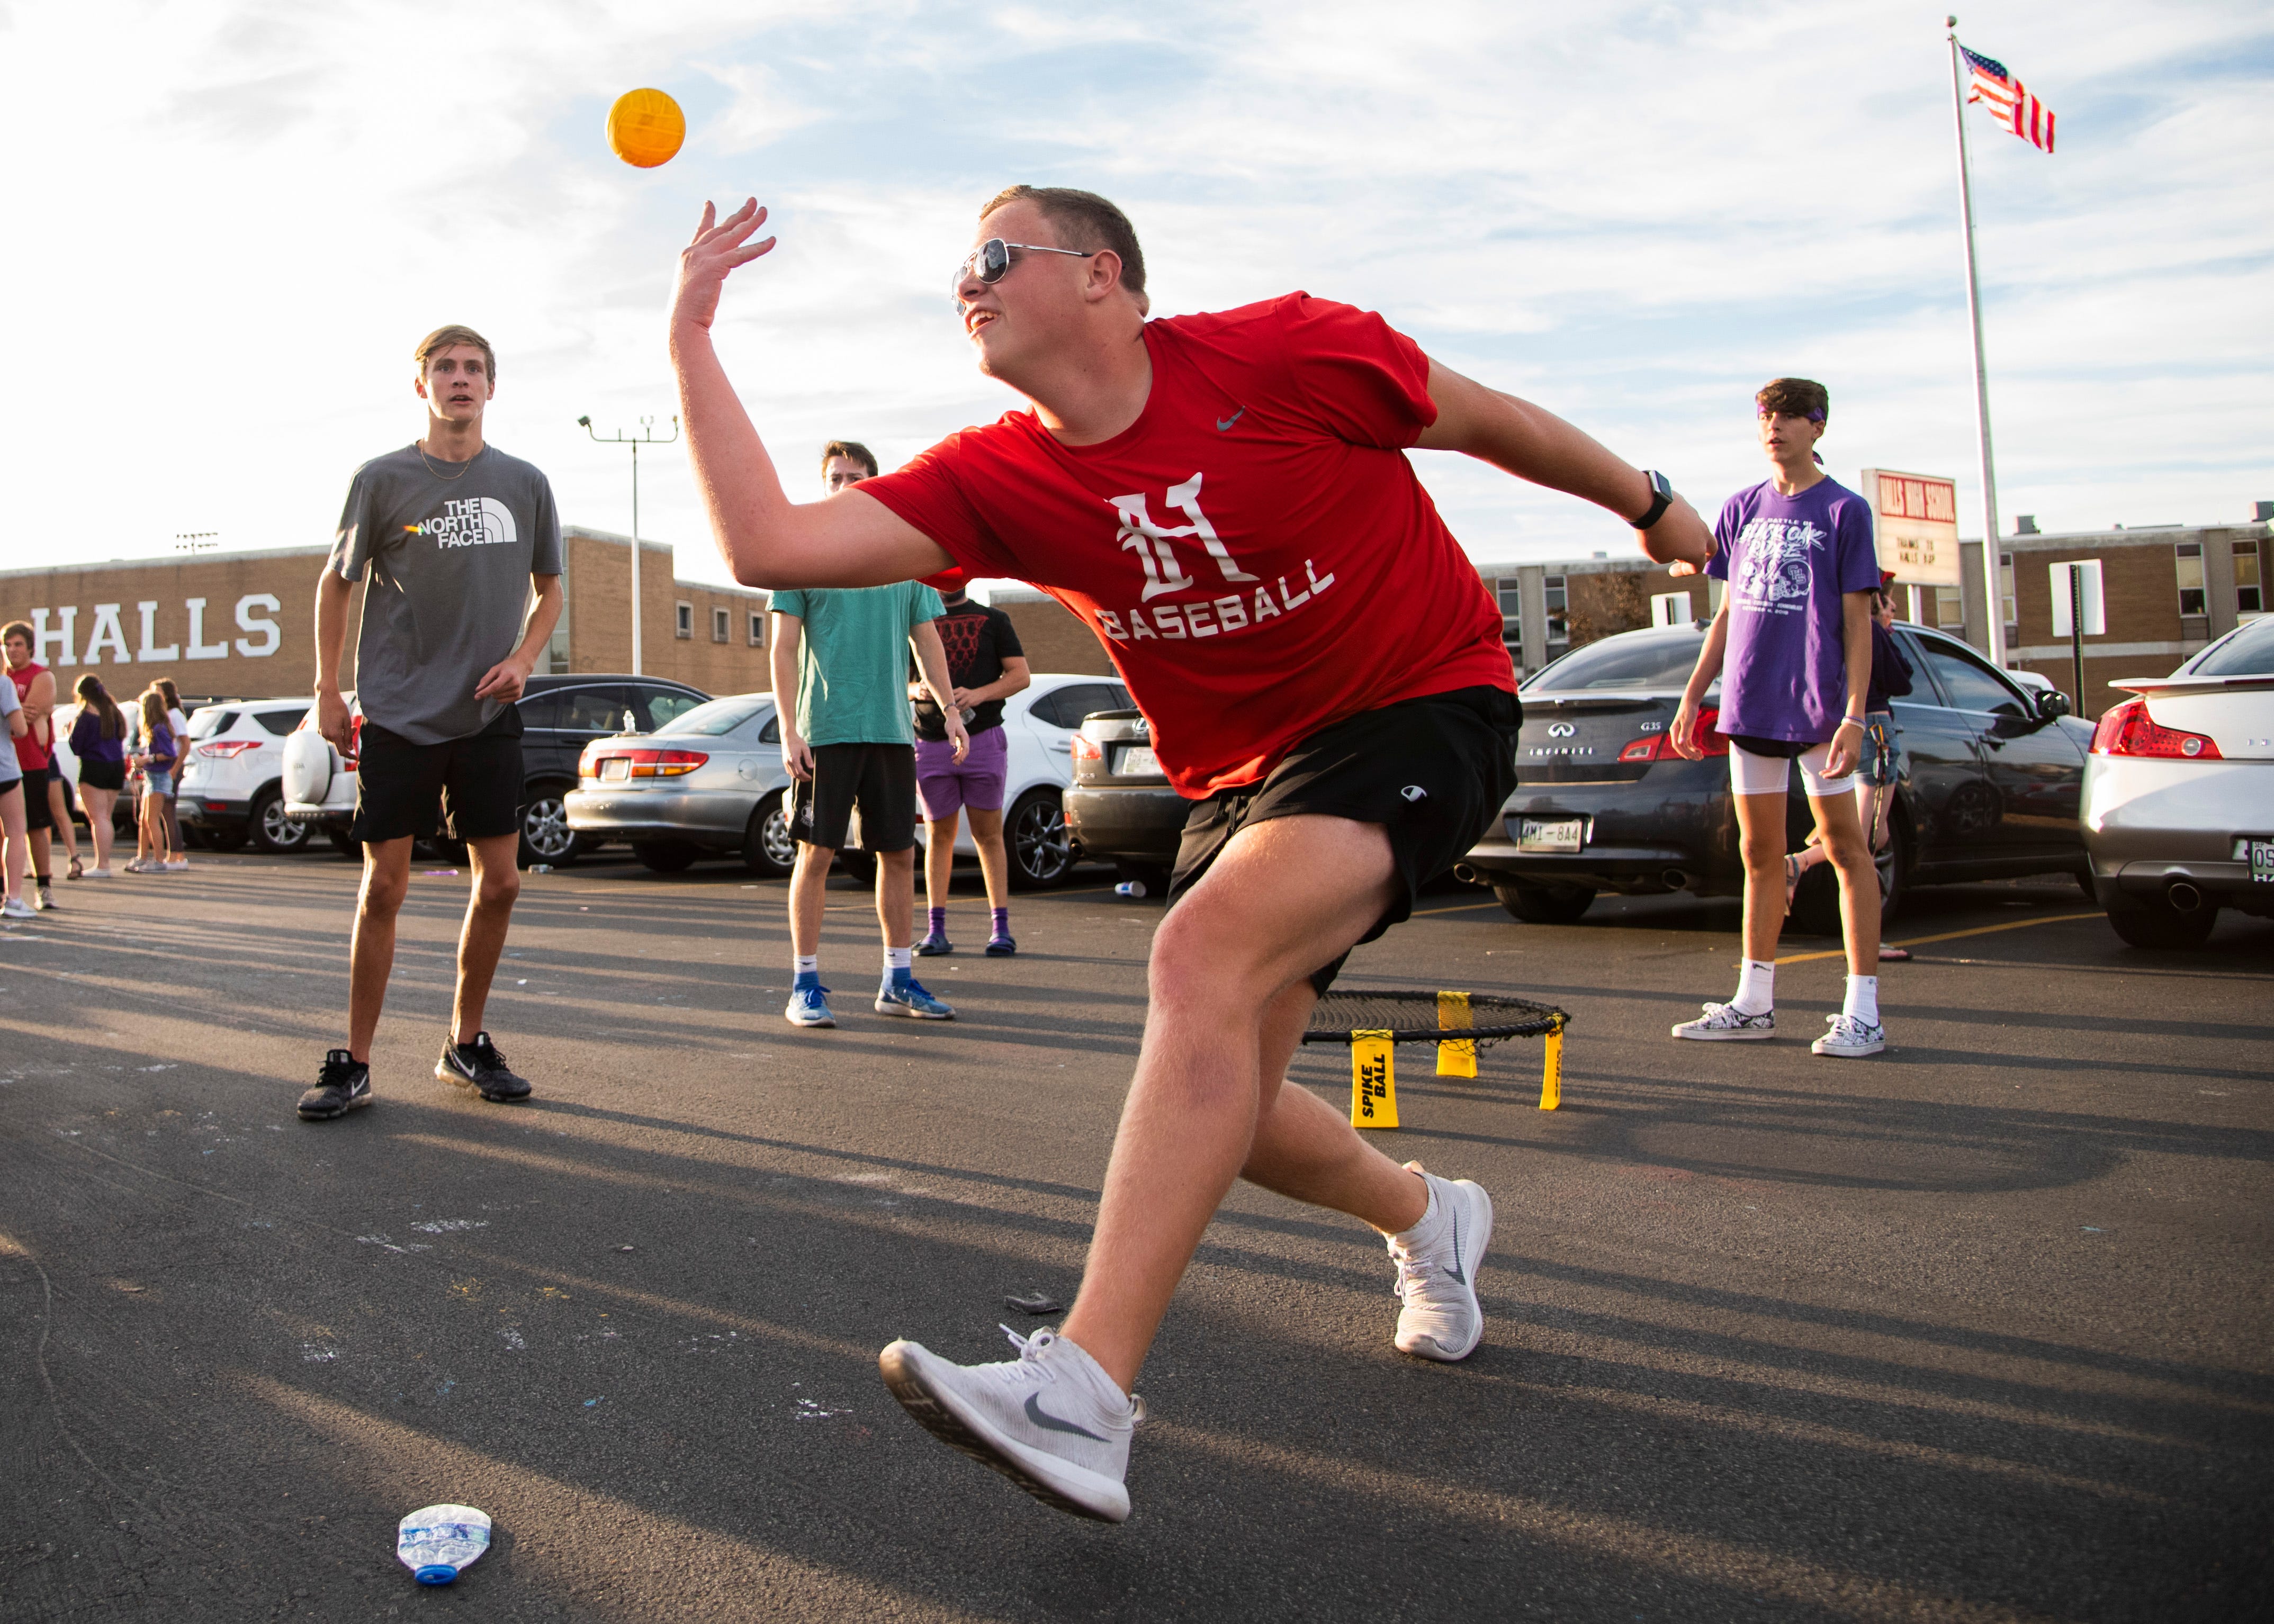 Halls senior, Dawson Langston plays spike ball before the Halls and Central high school football game on Friday, October 4, 2019 at Halls High School.